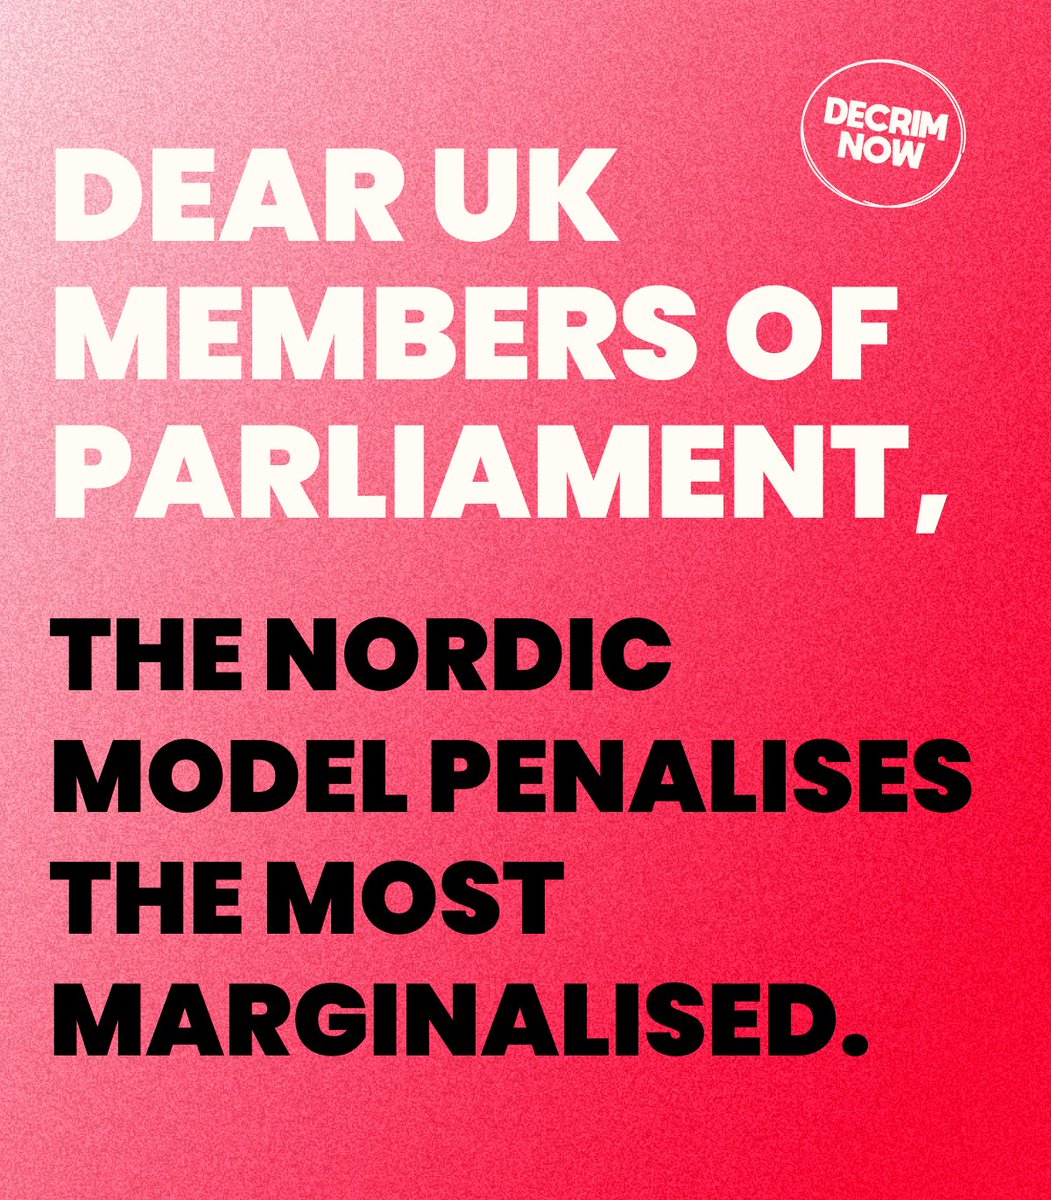  @JCWI_UK signed our open letter against the Nordic Model Joint Council for the Welfare of Immigrants are an independent charity fighting for justice in immigration, asylum & nationality law in the UK since 1967.Read the letter here  https://decrimnow.org.uk/open-letter-on-the-nordic-model/  #notonordicmodel